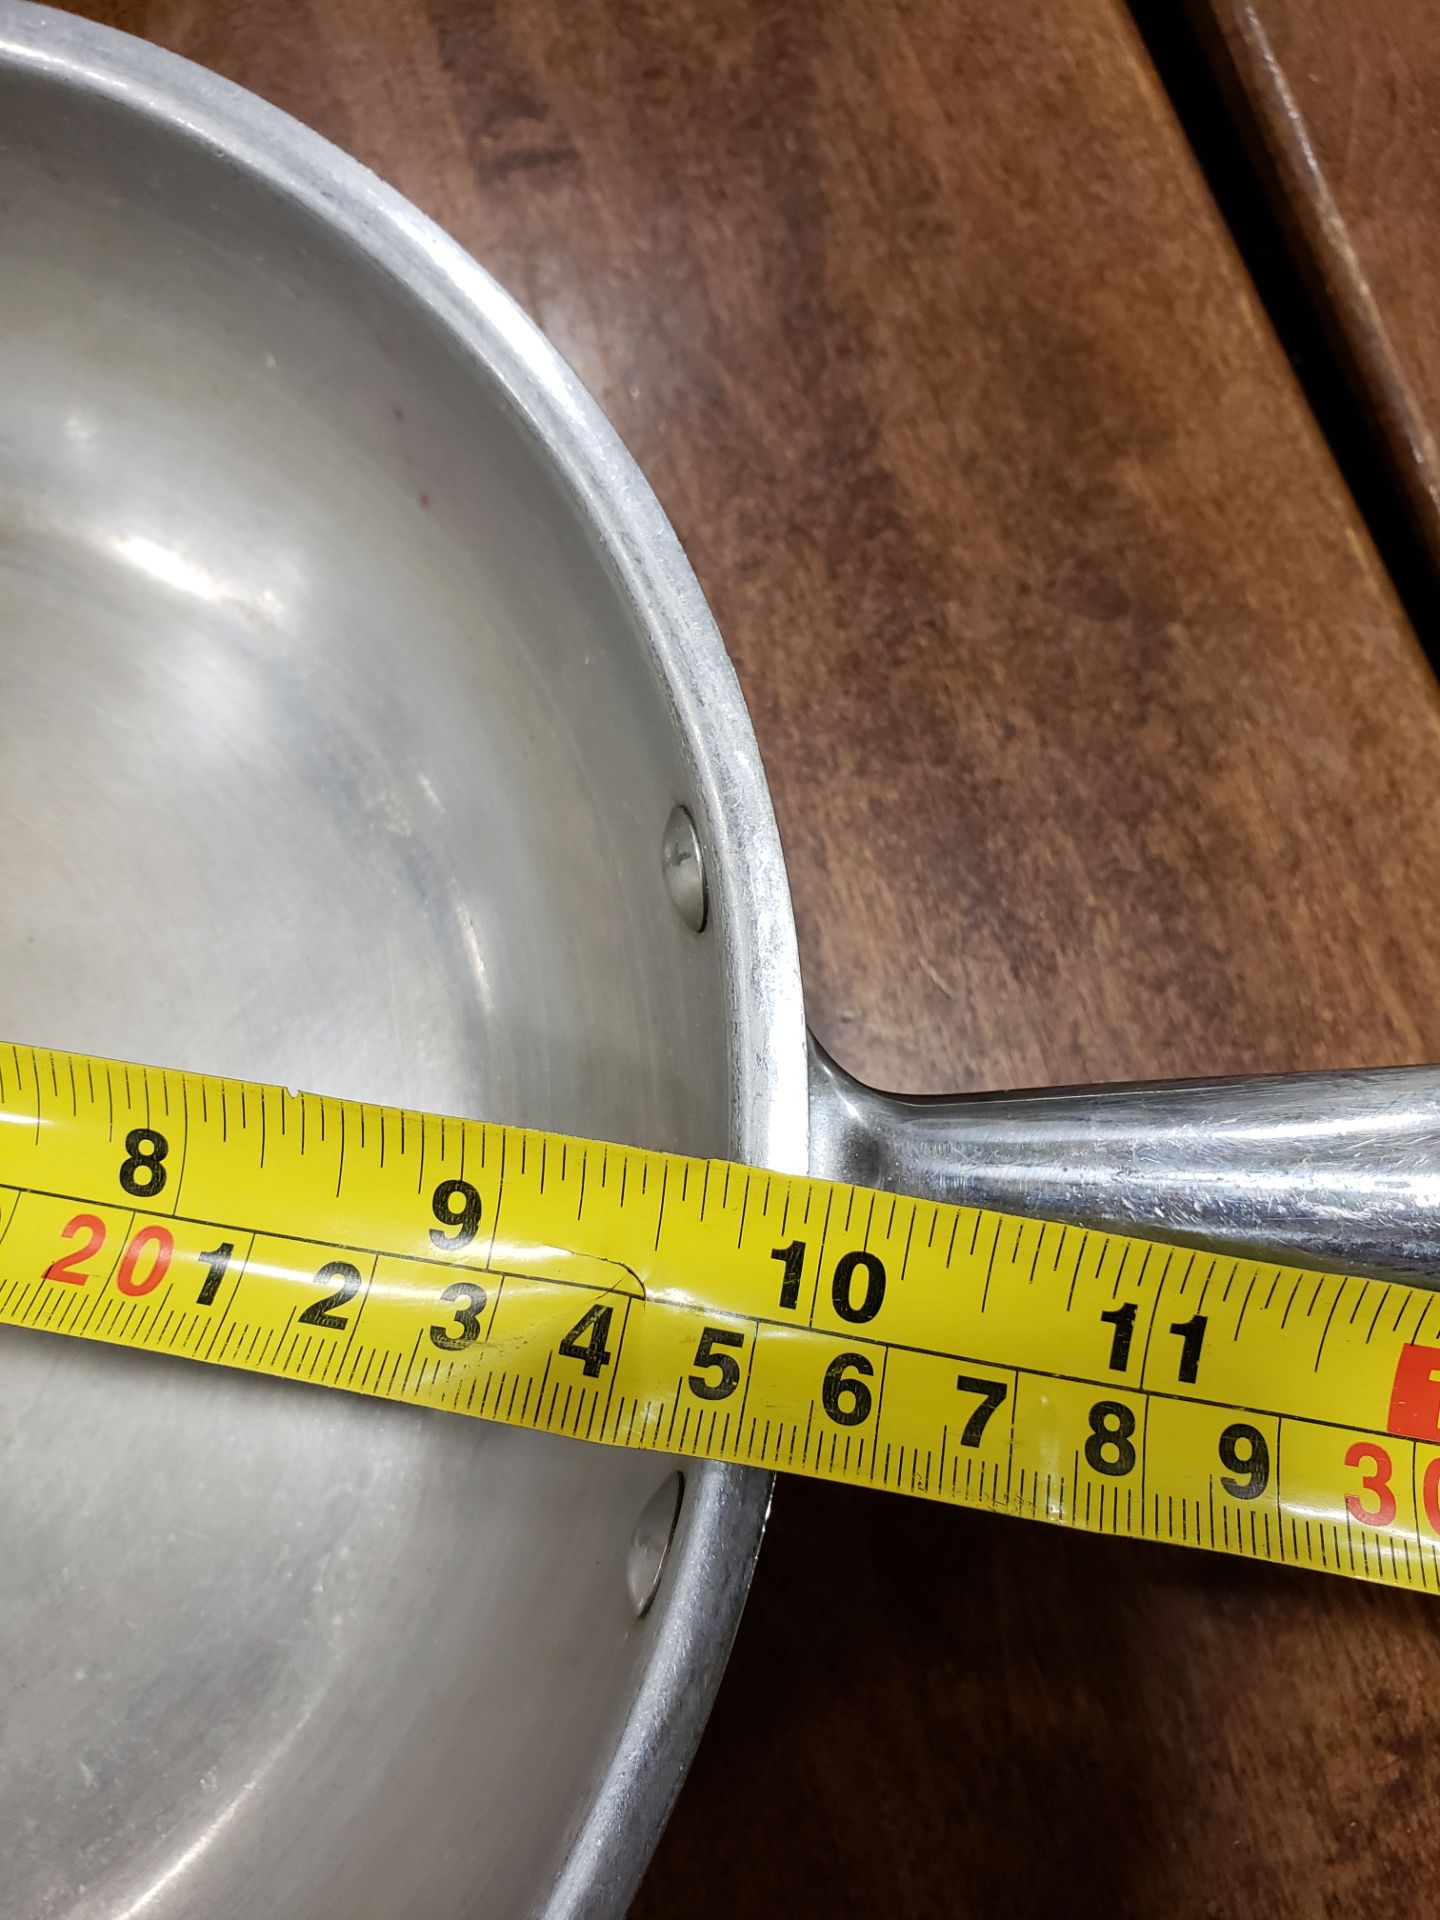 Stainless Steel Fry Pans 1 x 13" & 1 x 10" - Lot of 2 - Image 3 of 5